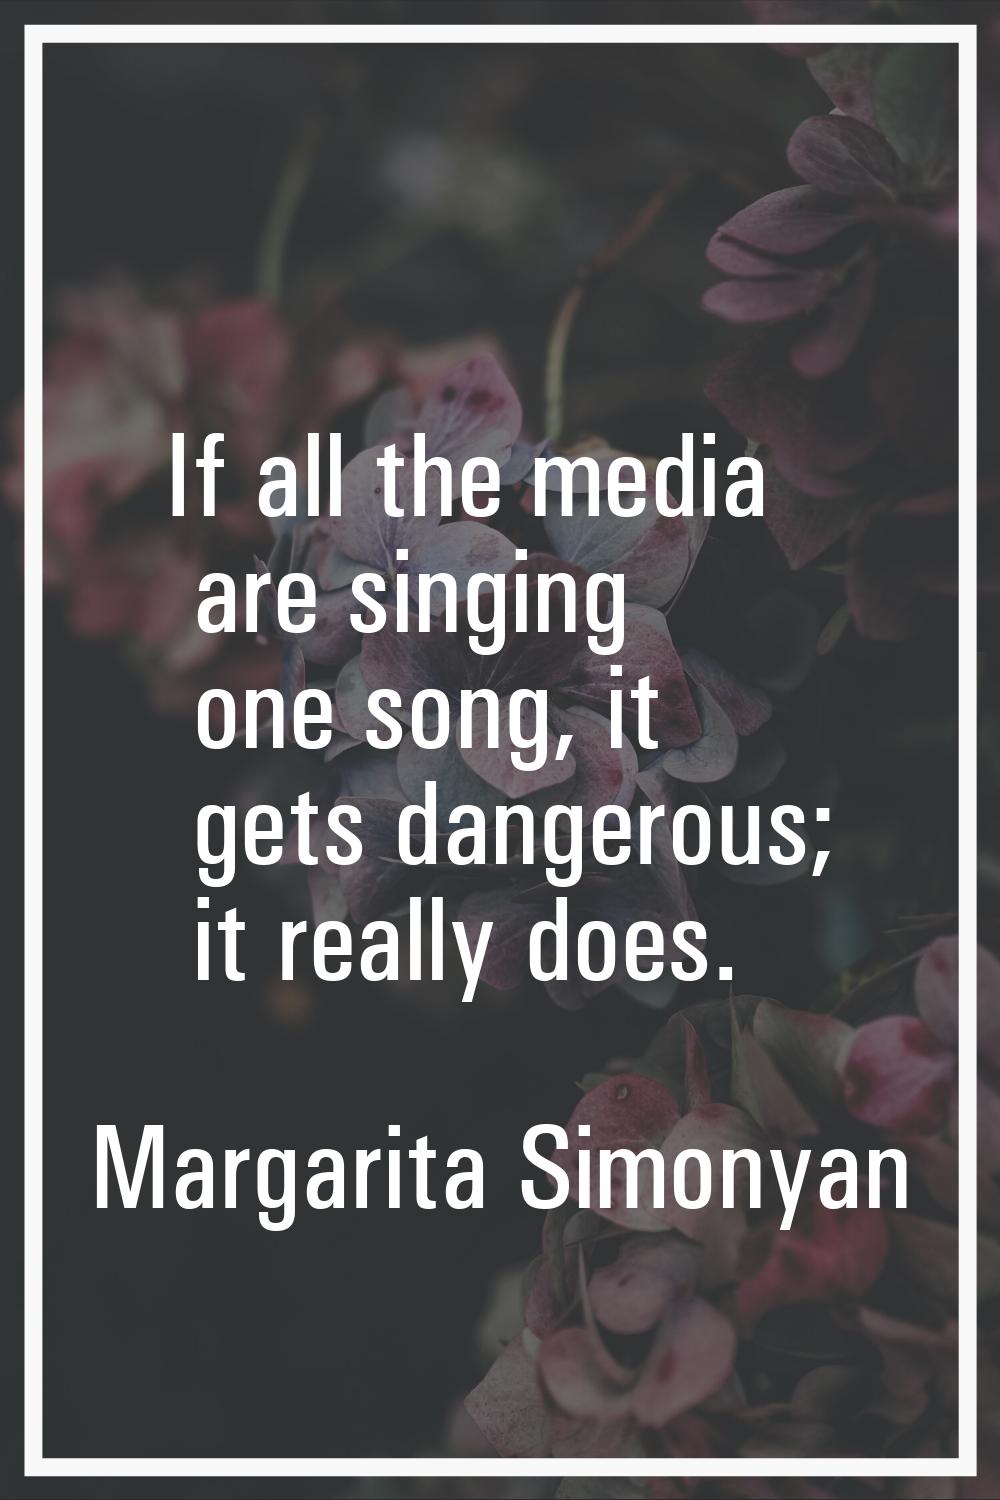 If all the media are singing one song, it gets dangerous; it really does.